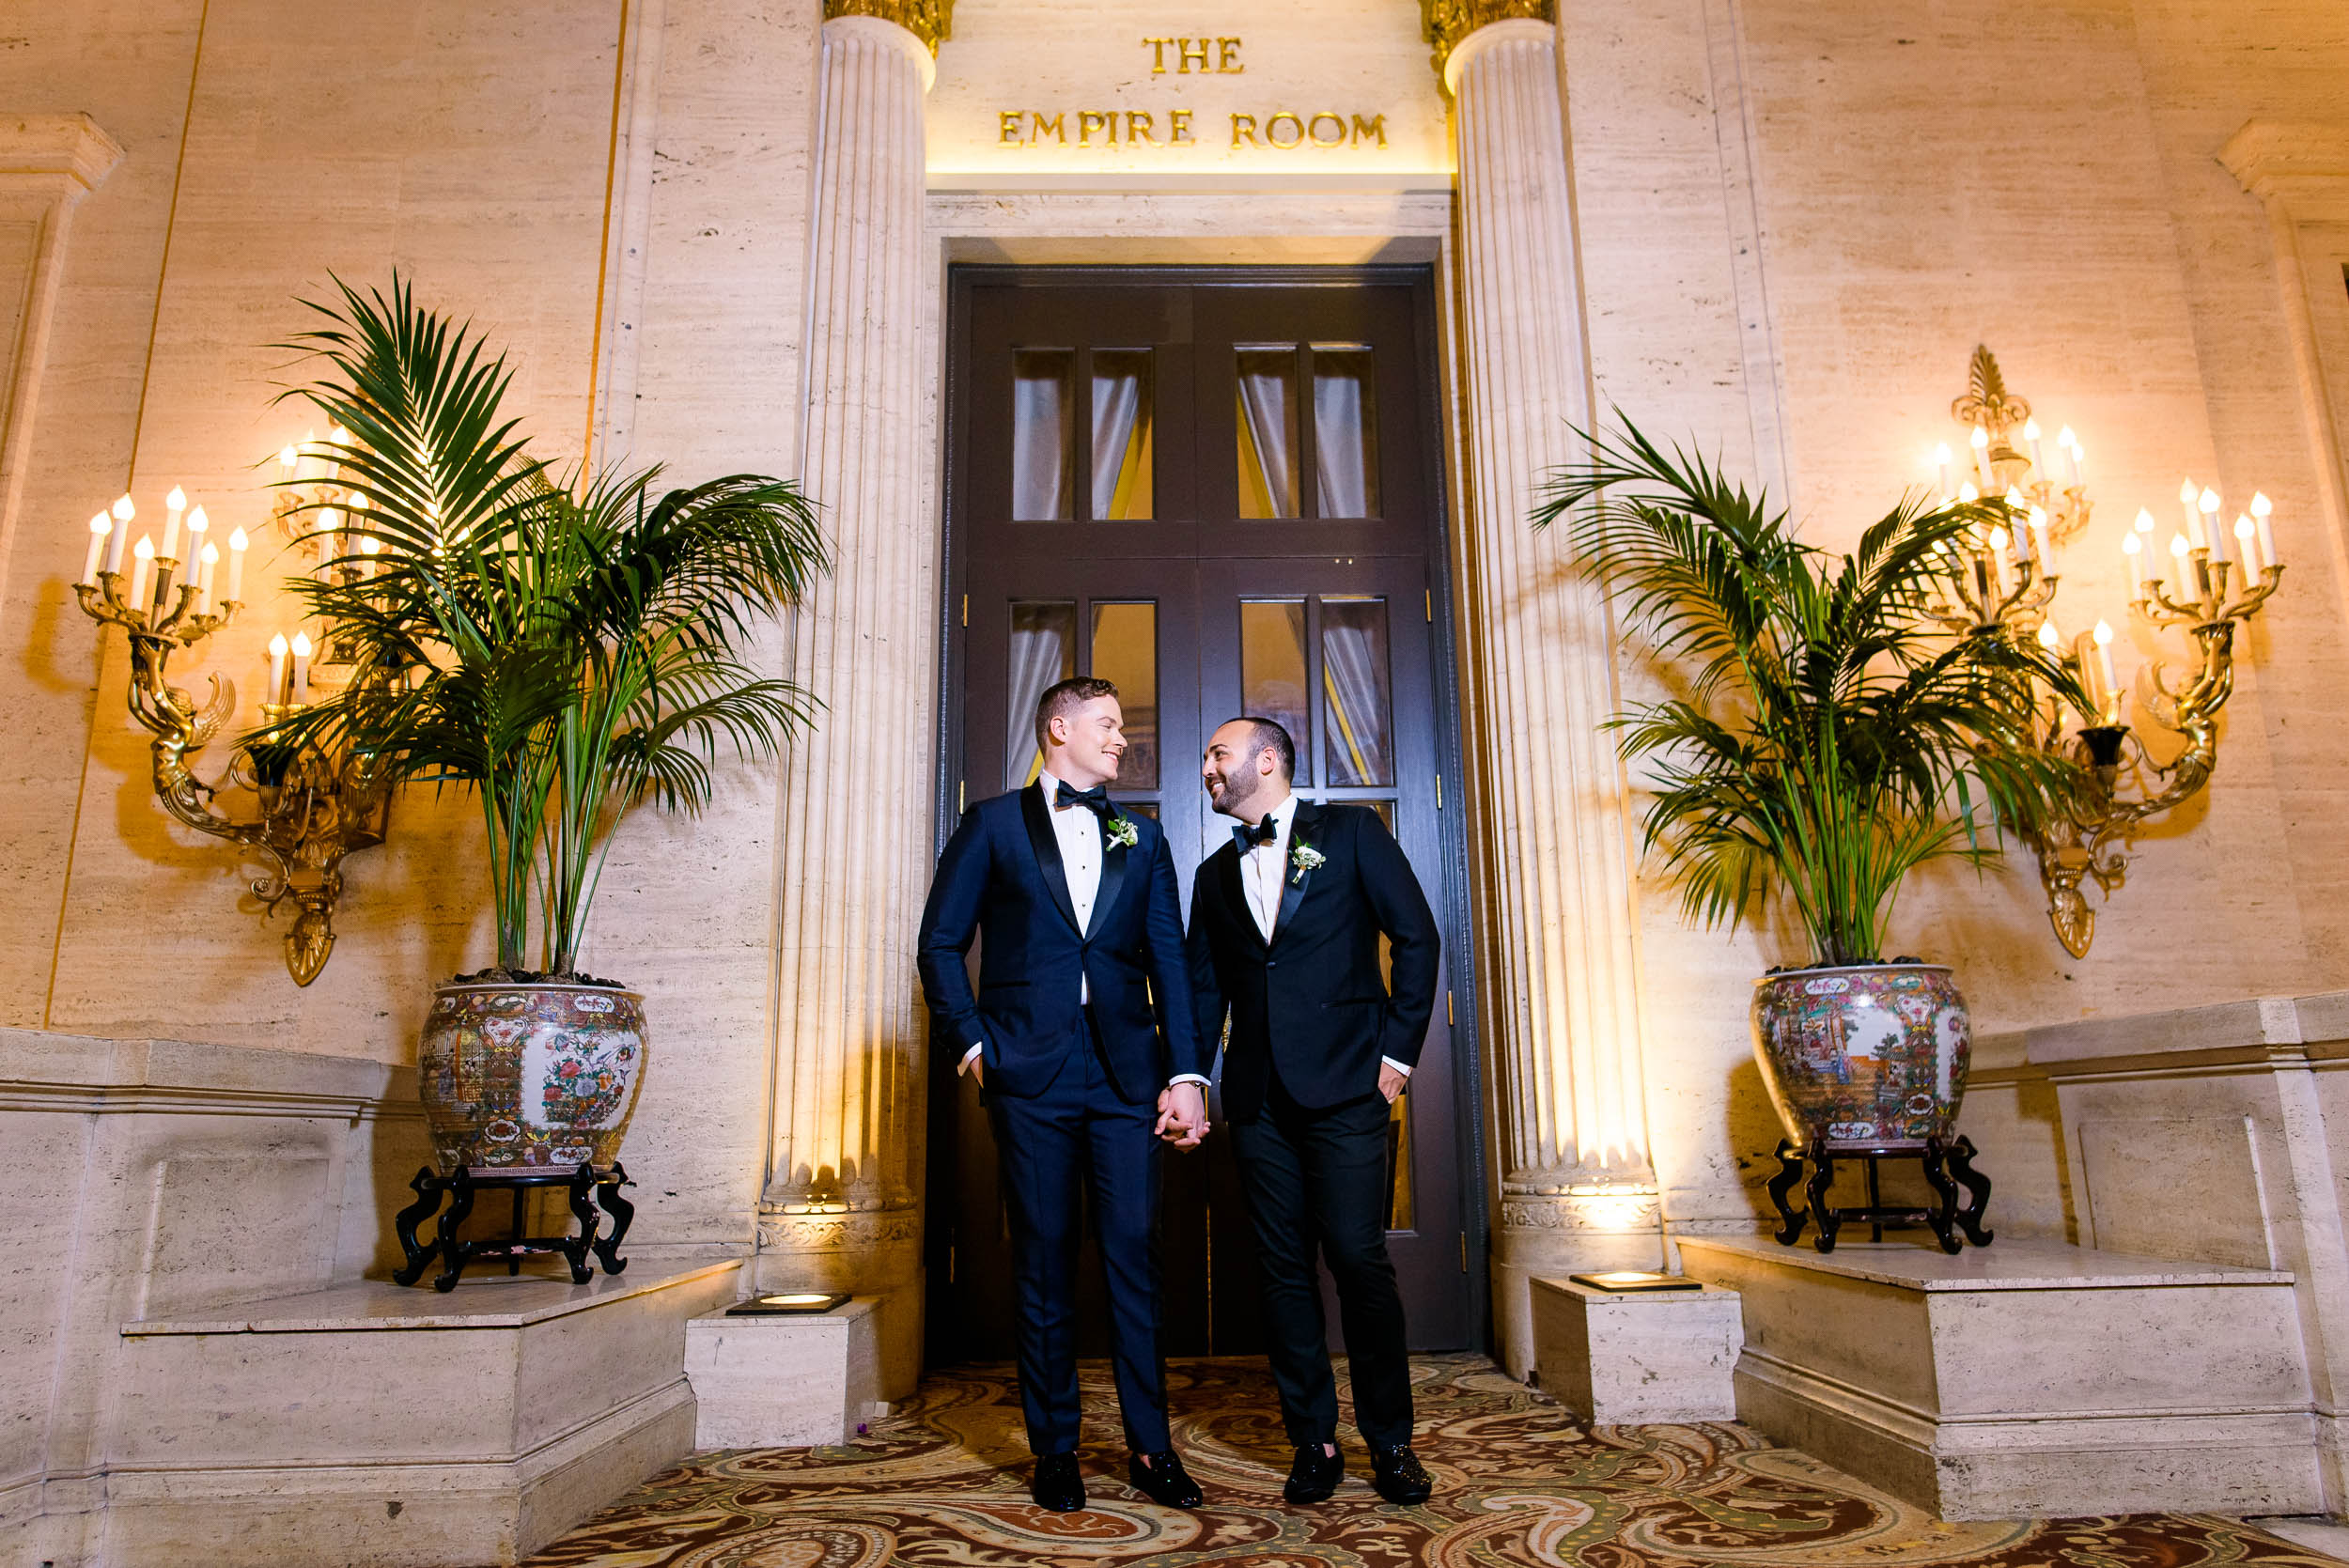 Stylish wedding tuxedos for luxurious fall wedding at the Chicago Symphony Center captured by J. Brown Photography. See more wedding ideas at jbrownphotography.com!